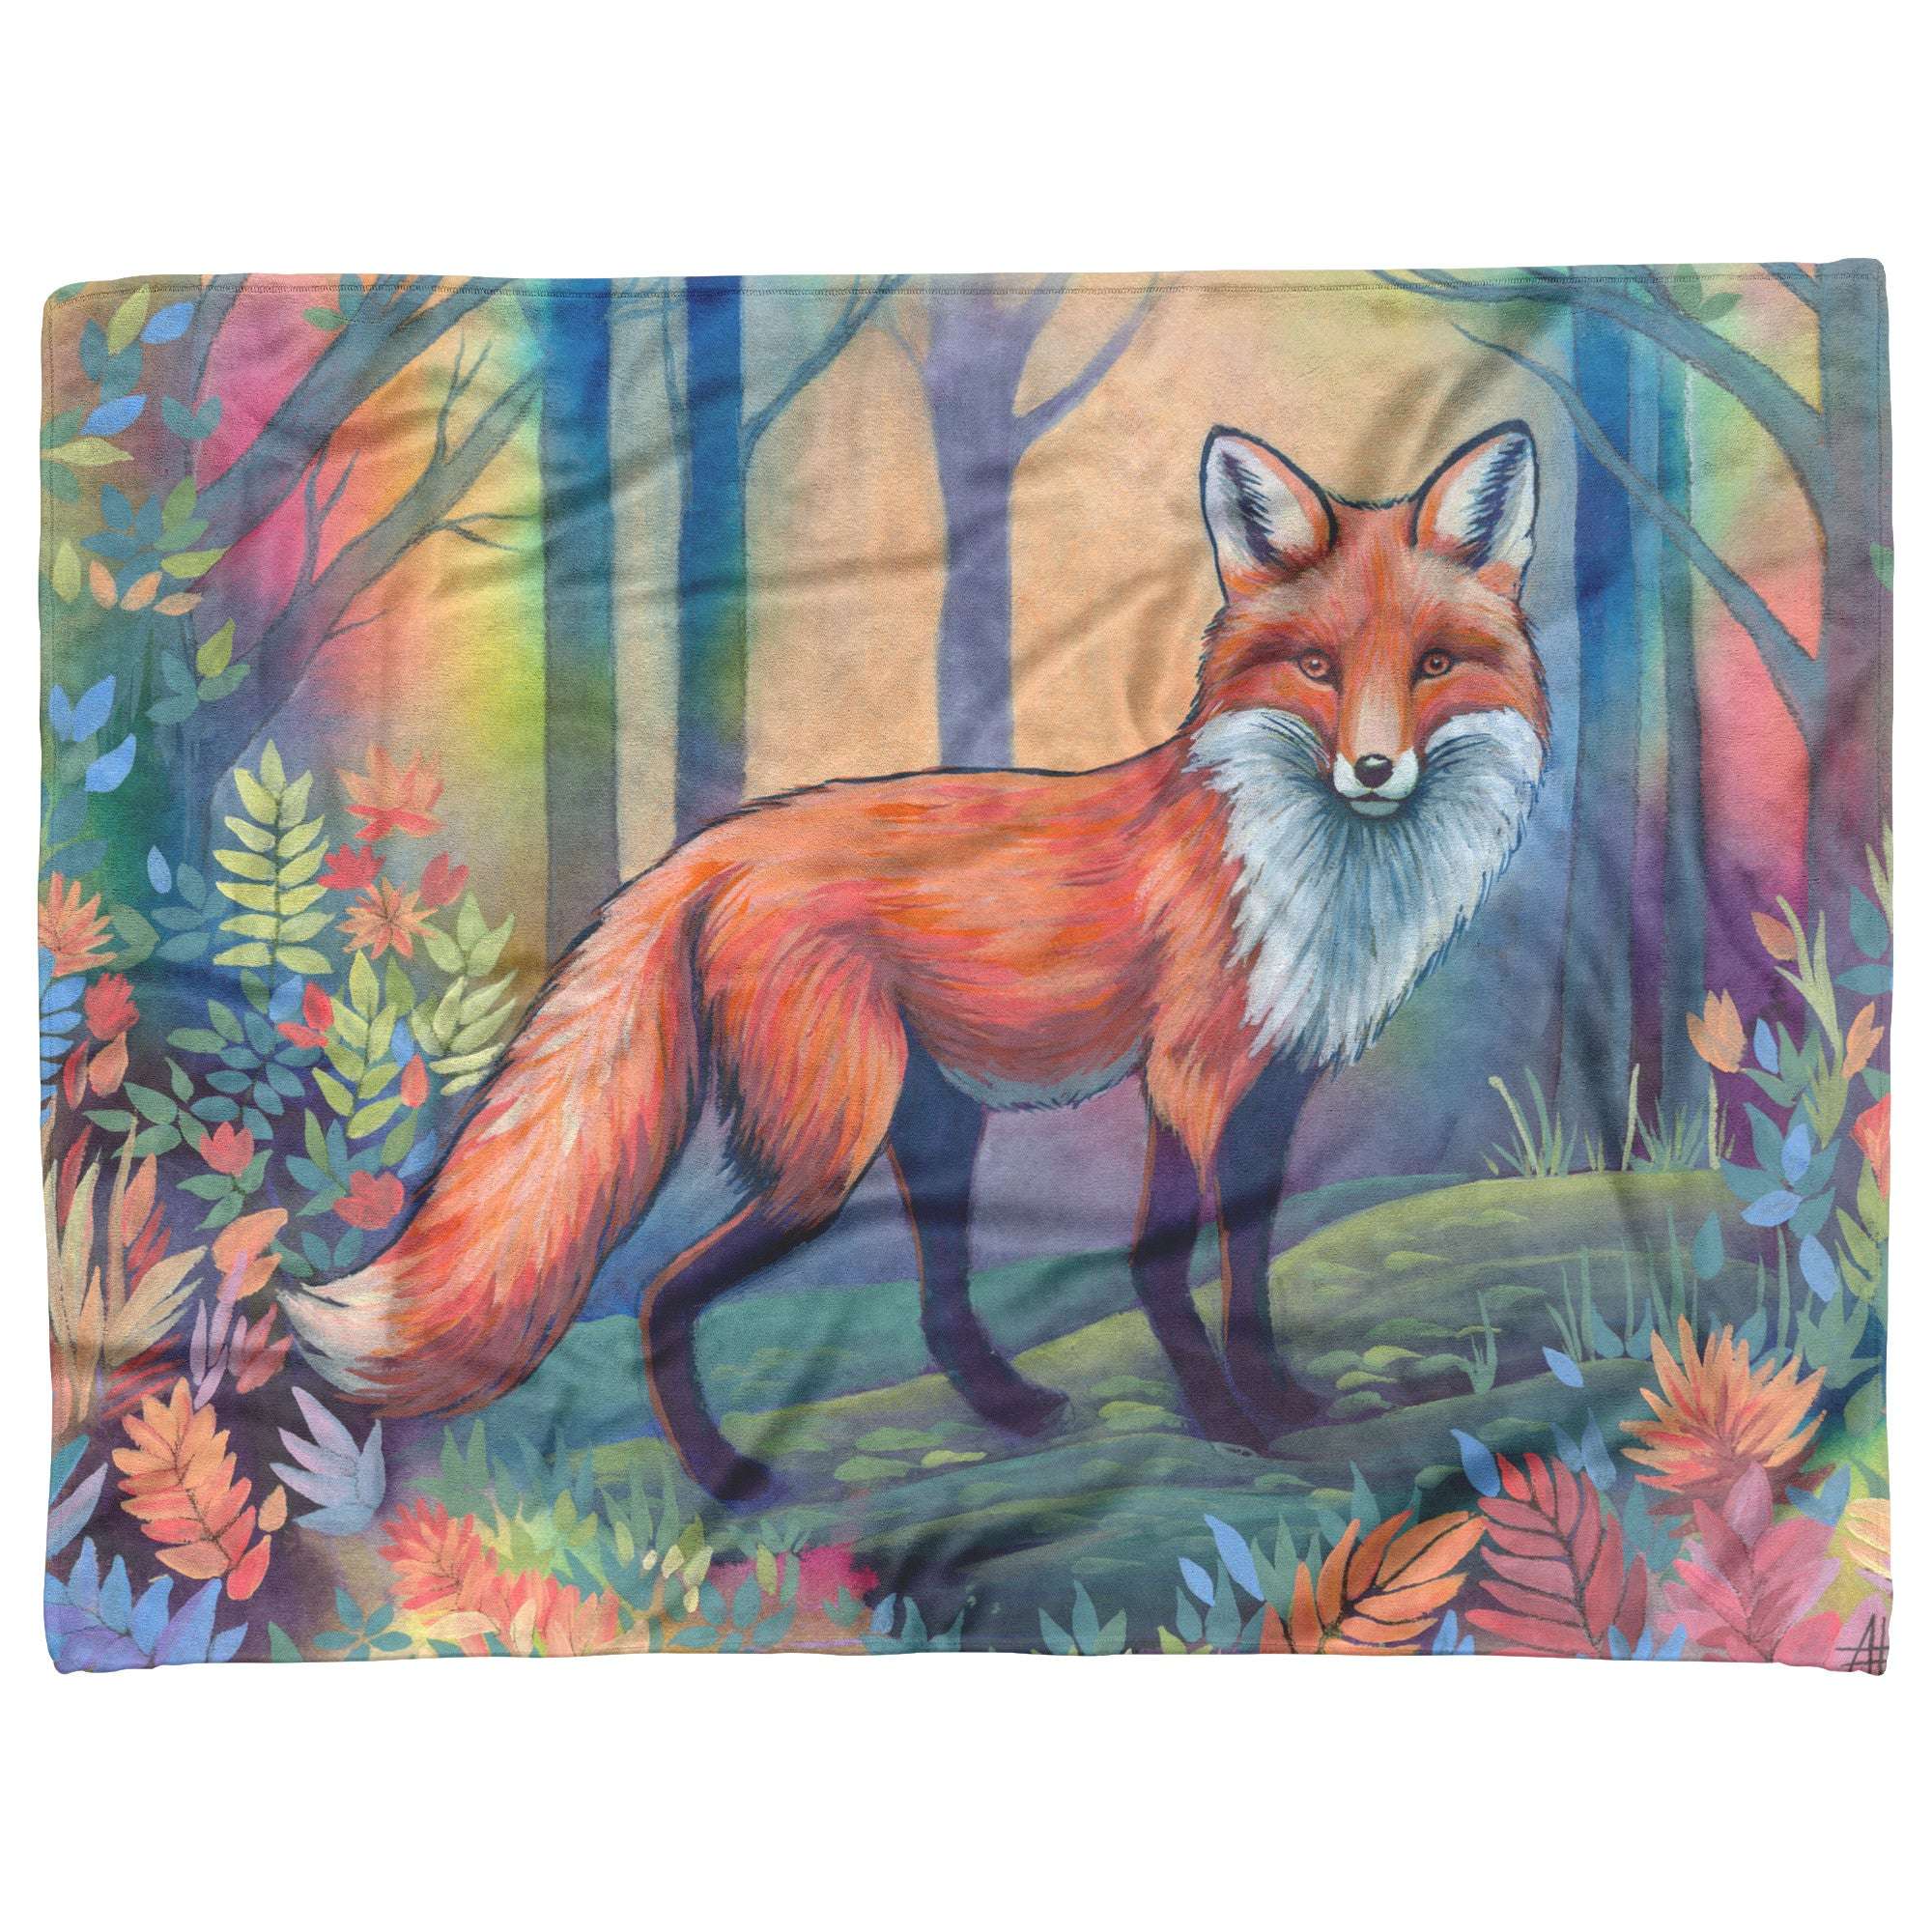 Fox blanket printed with the illustration of a fox standing in a colorful forest with vibrant foliage and trees under a soft, blue sky.